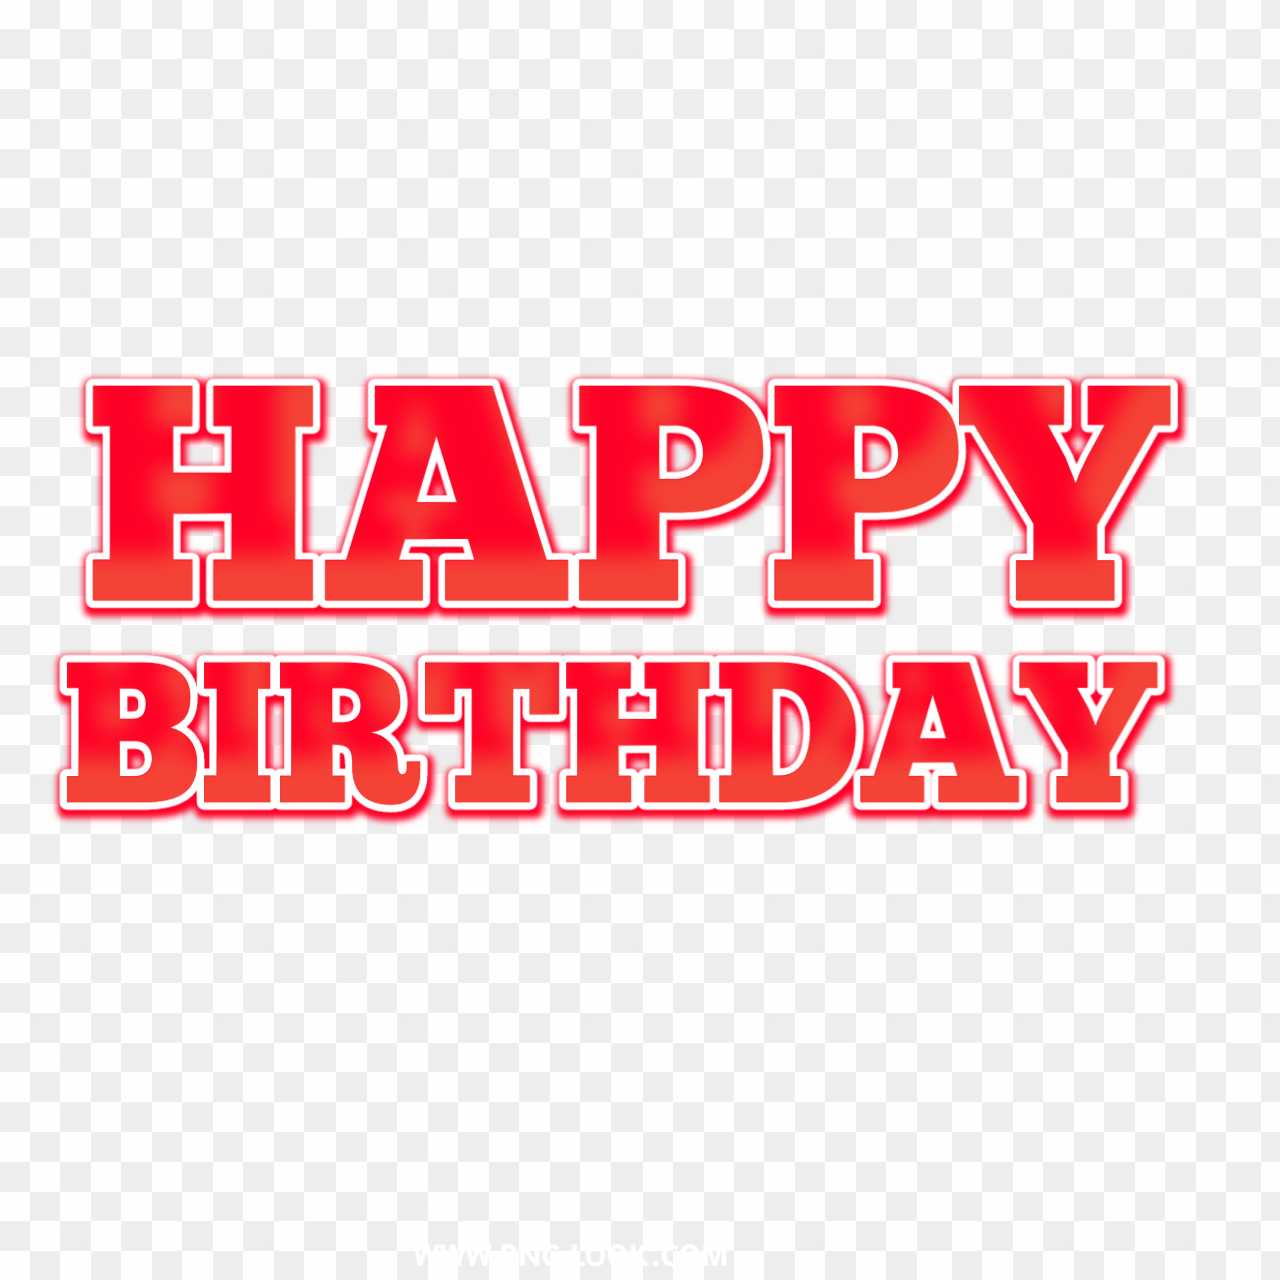 Happy Birthday PNG free download 